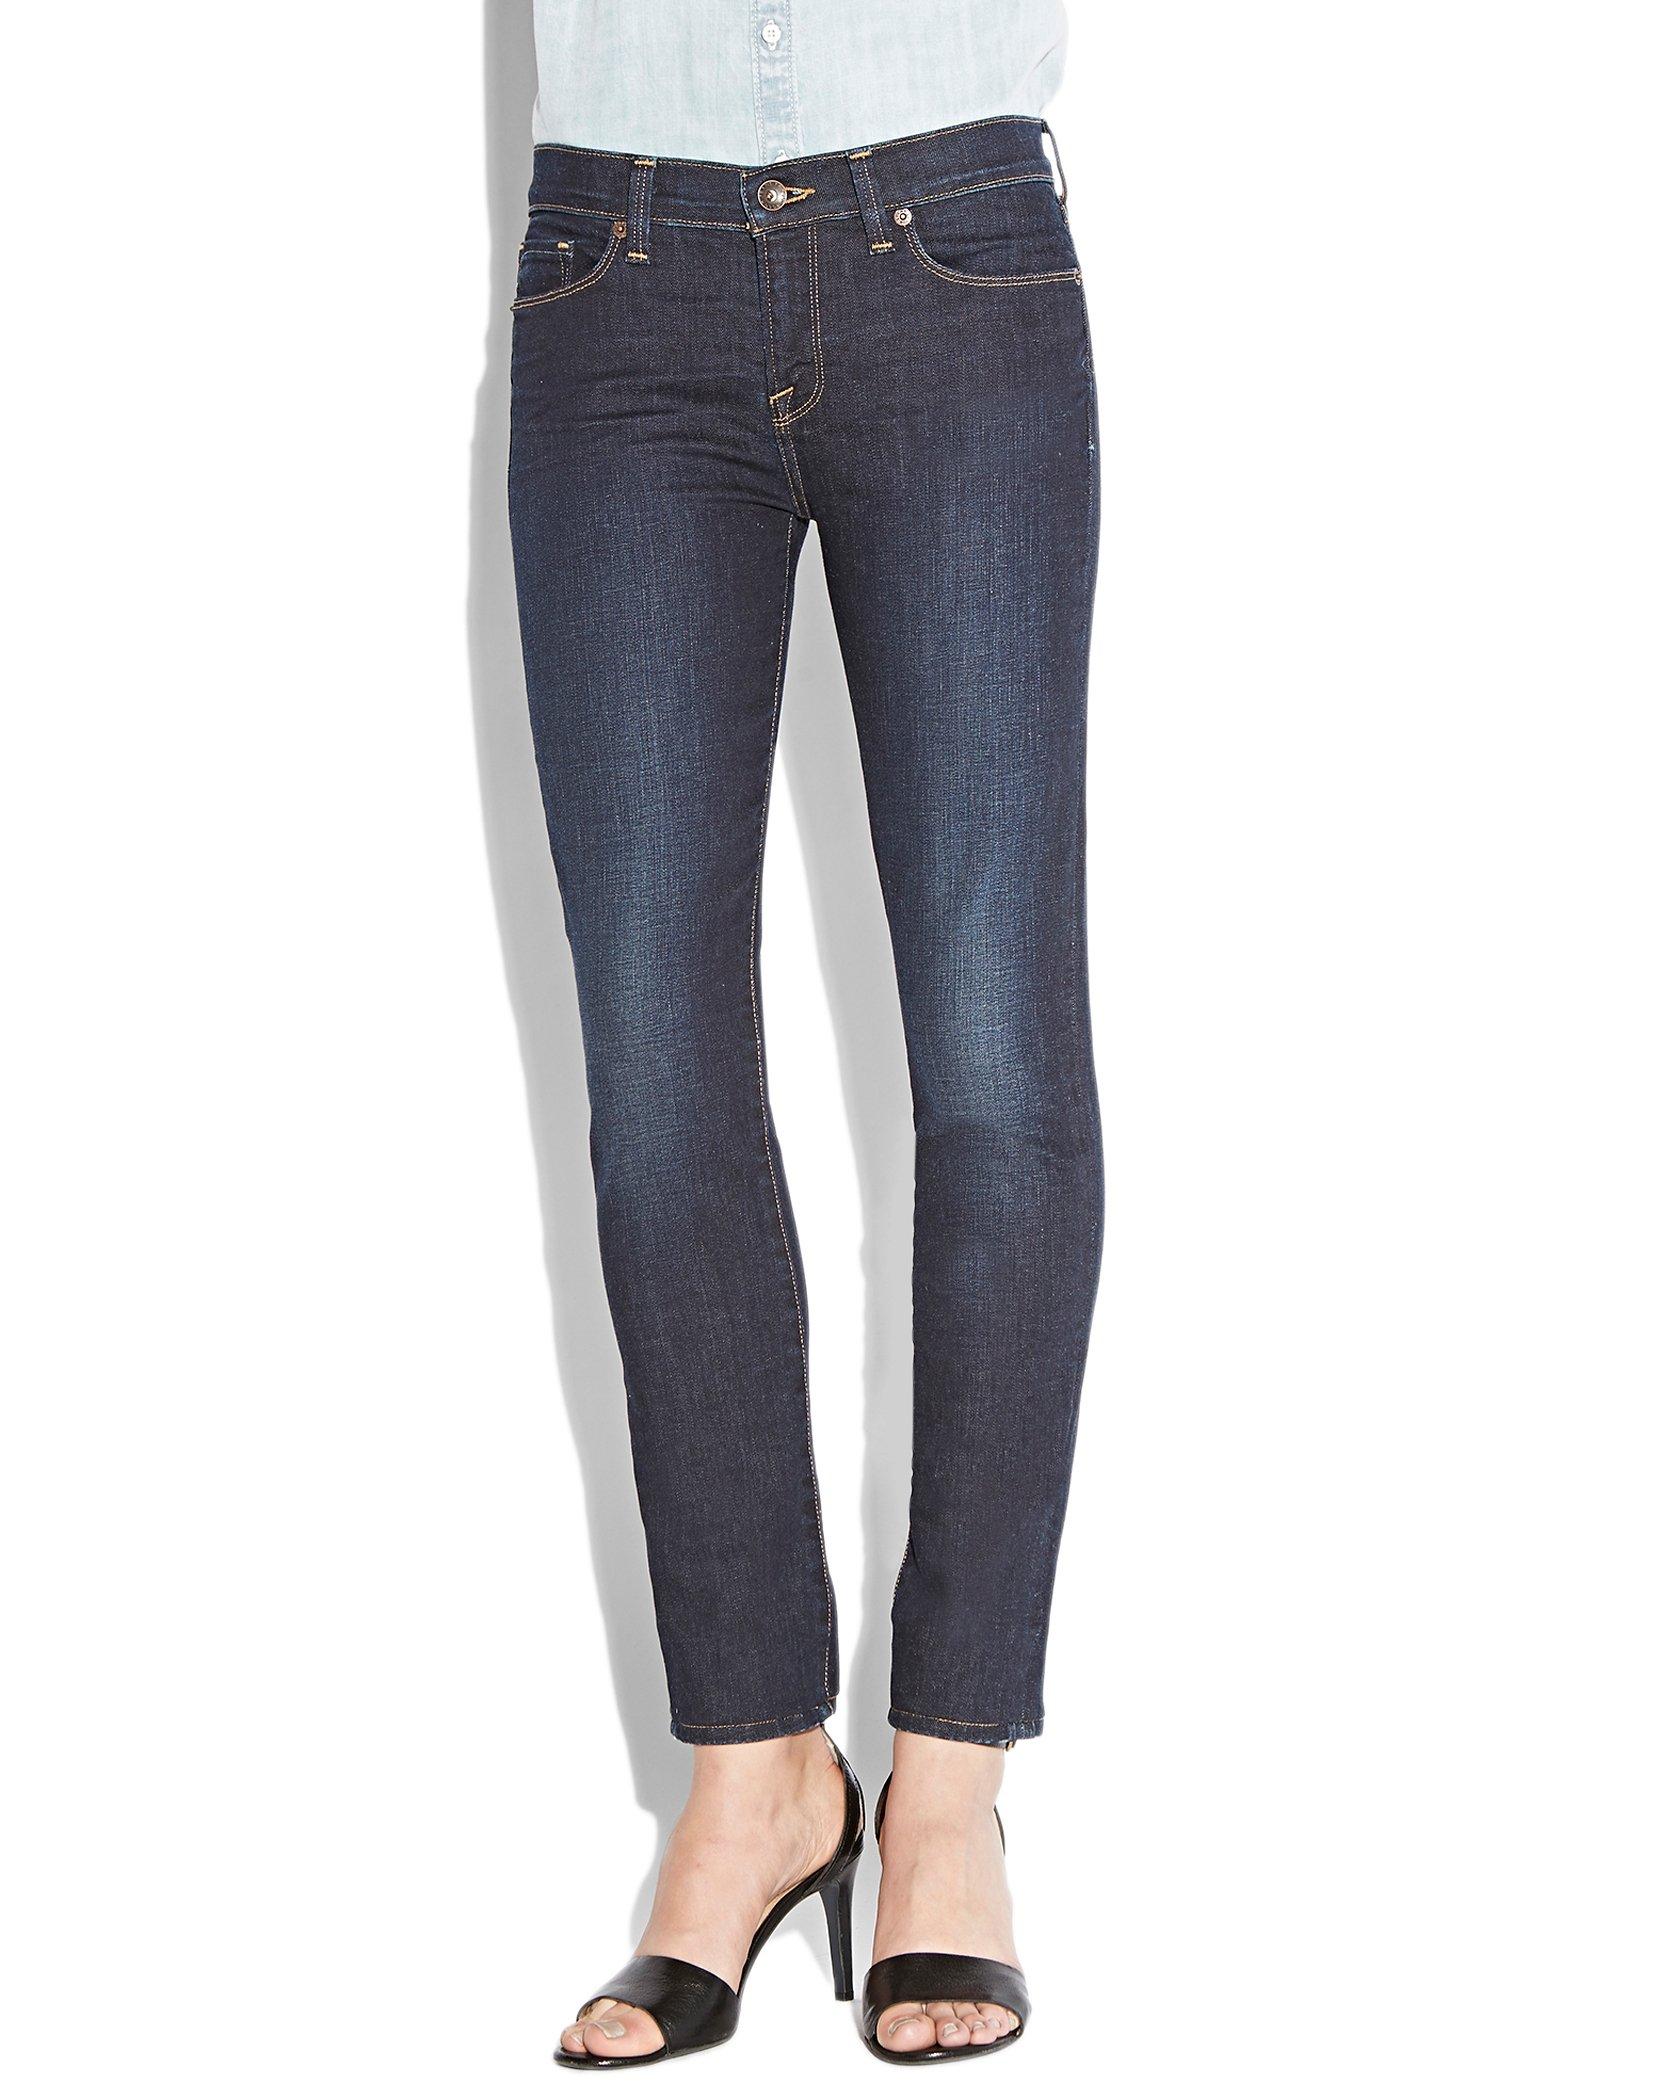 519 extreme skinny fit jeans